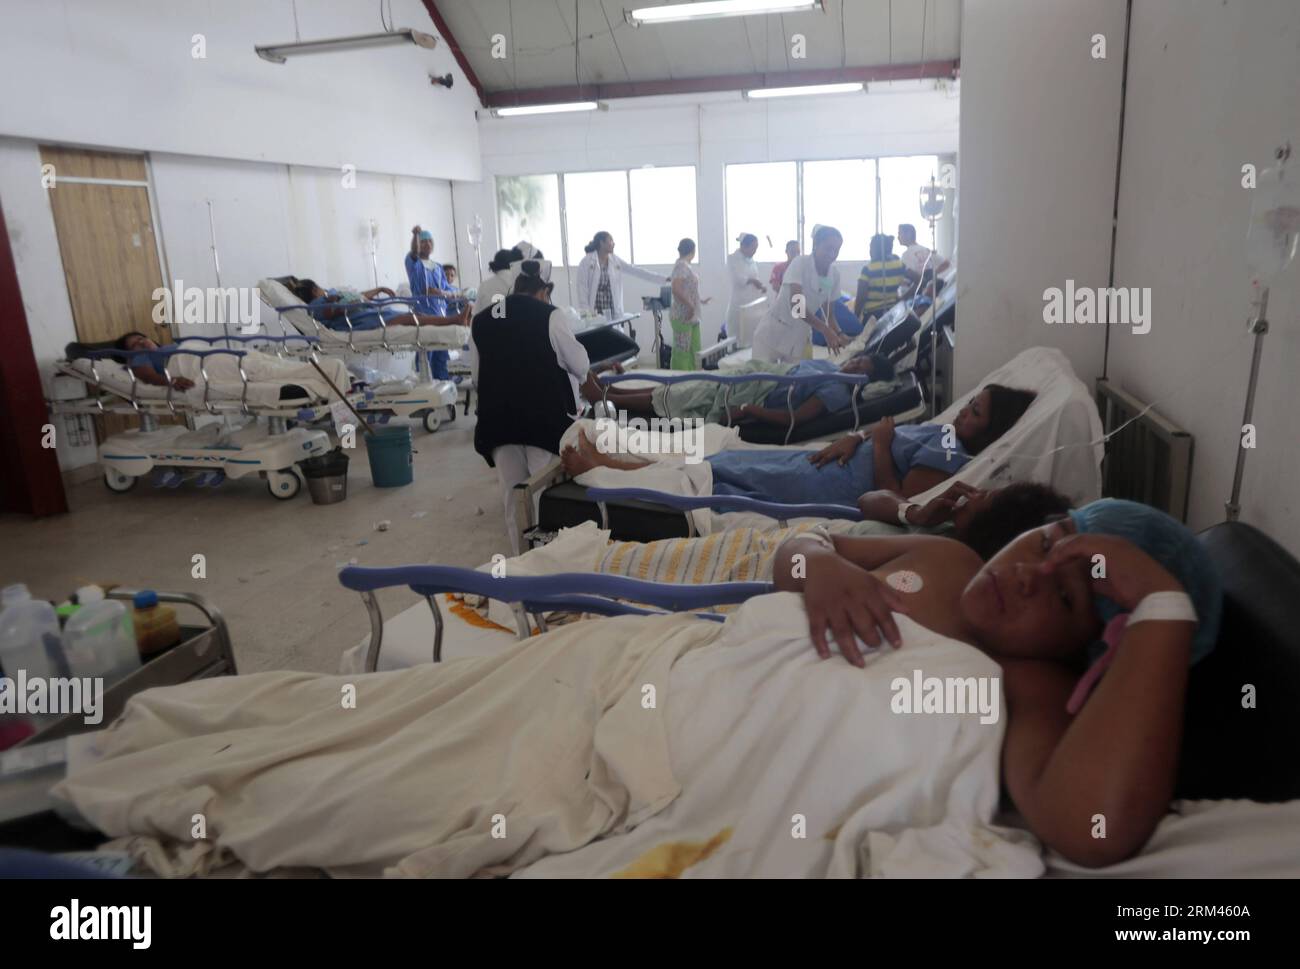 Bildnummer: 60380599  Datum: 21.08.2013  Copyright: imago/Xinhua Evacuated patients of Donato Alarcon Hospital receive medical attention after an earthquake, in Acapulco City of Guerrero State, Mexico, on Aug. 21, 2013. An earthquake measuring 6.1 on the Richter scale on Wednesday jolted central Mexico, which is 18 km northwest of Ayutla de los Libres municipality in southern Guerrero state, the U.S. Geological Survey, monitored here, said. (Xinhua/Victor Lopez) MEXICO-ACAPULCO-ENVIRONMENT-EARTHQUAKE PUBLICATIONxNOTxINxCHN Gesellschaft Naturkatastrophe Erdbeben x0x xdd premiumd 2013 quer     6 Stock Photo